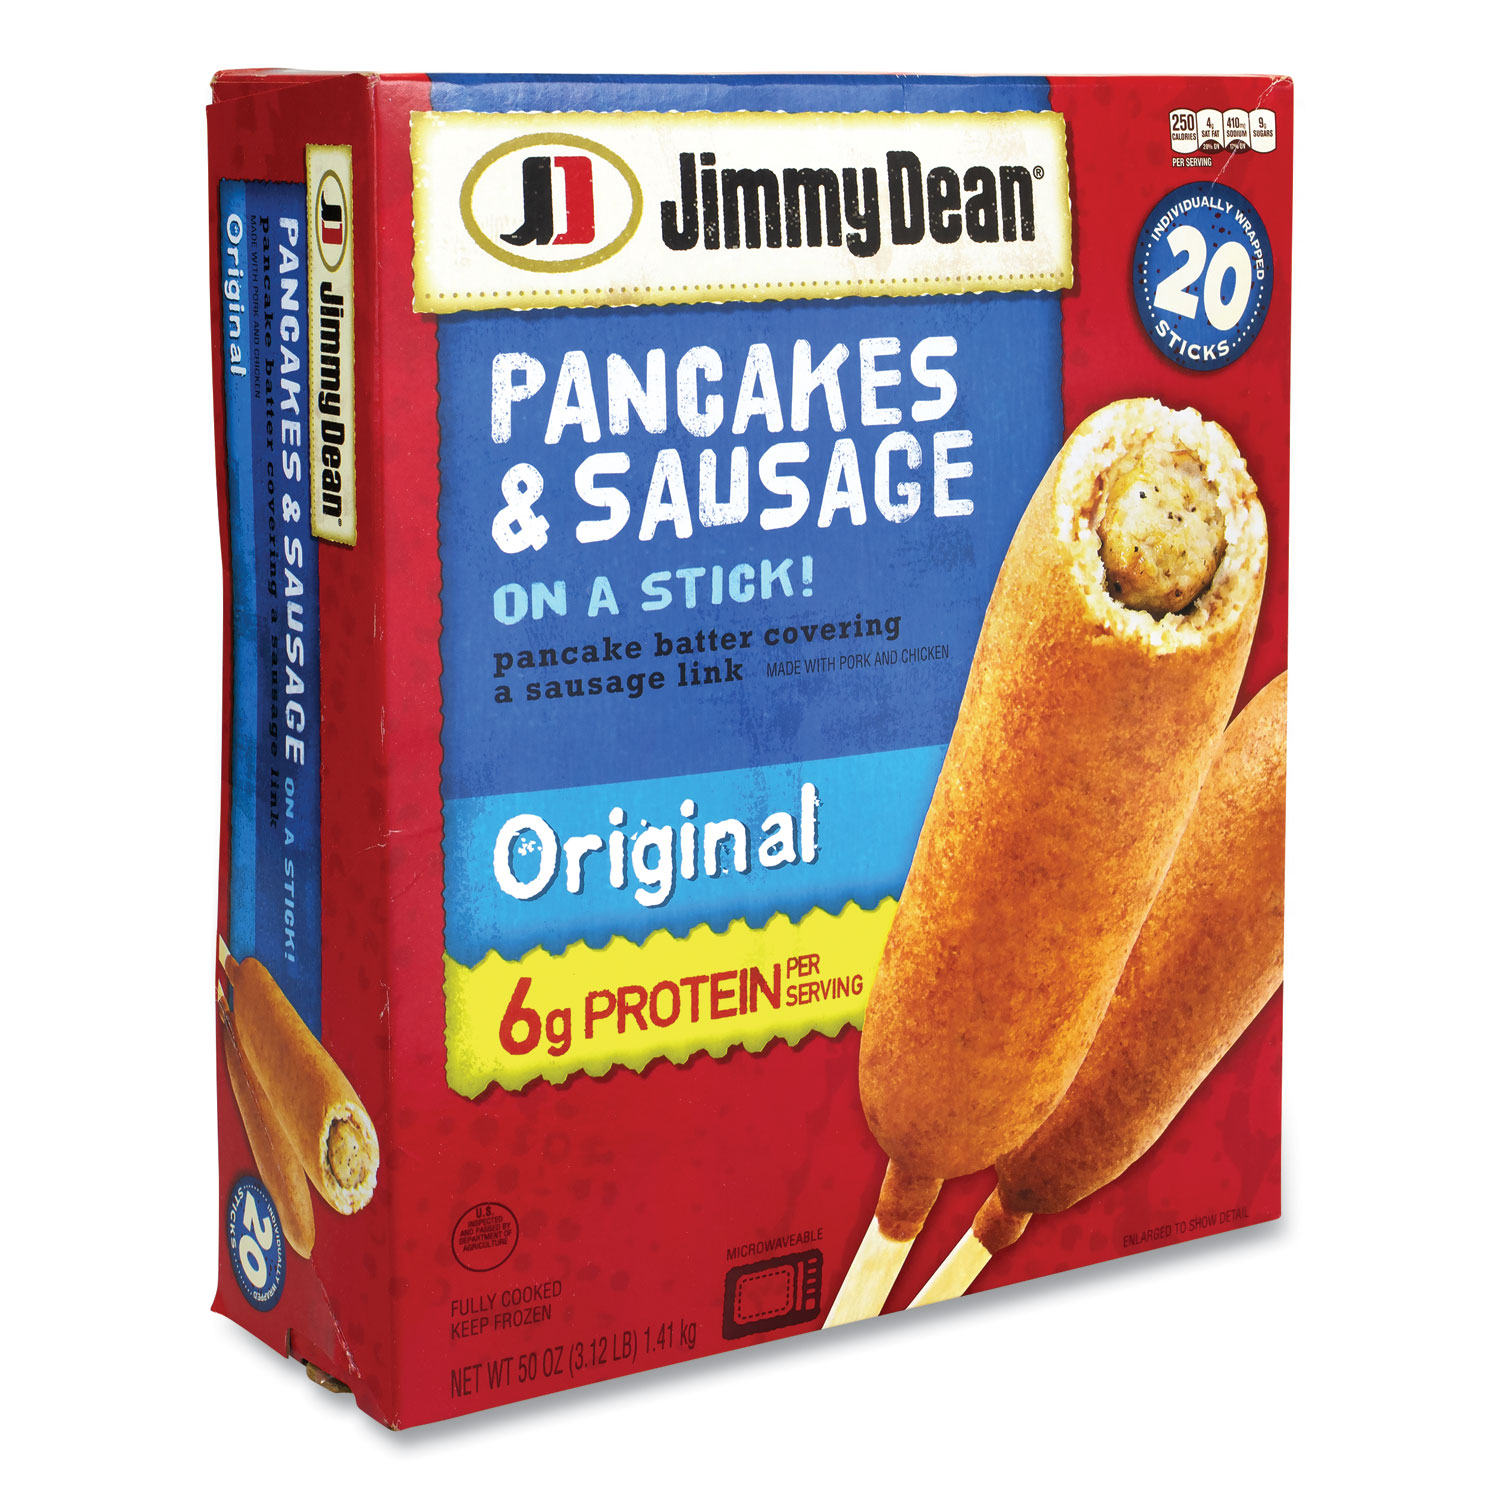  Jimmy Dean 33531 Pancakes and Sausage on a Stick, 50 oz Box, 20/Box, Free Delivery in 1-4 Business Days (GRR90300031) 